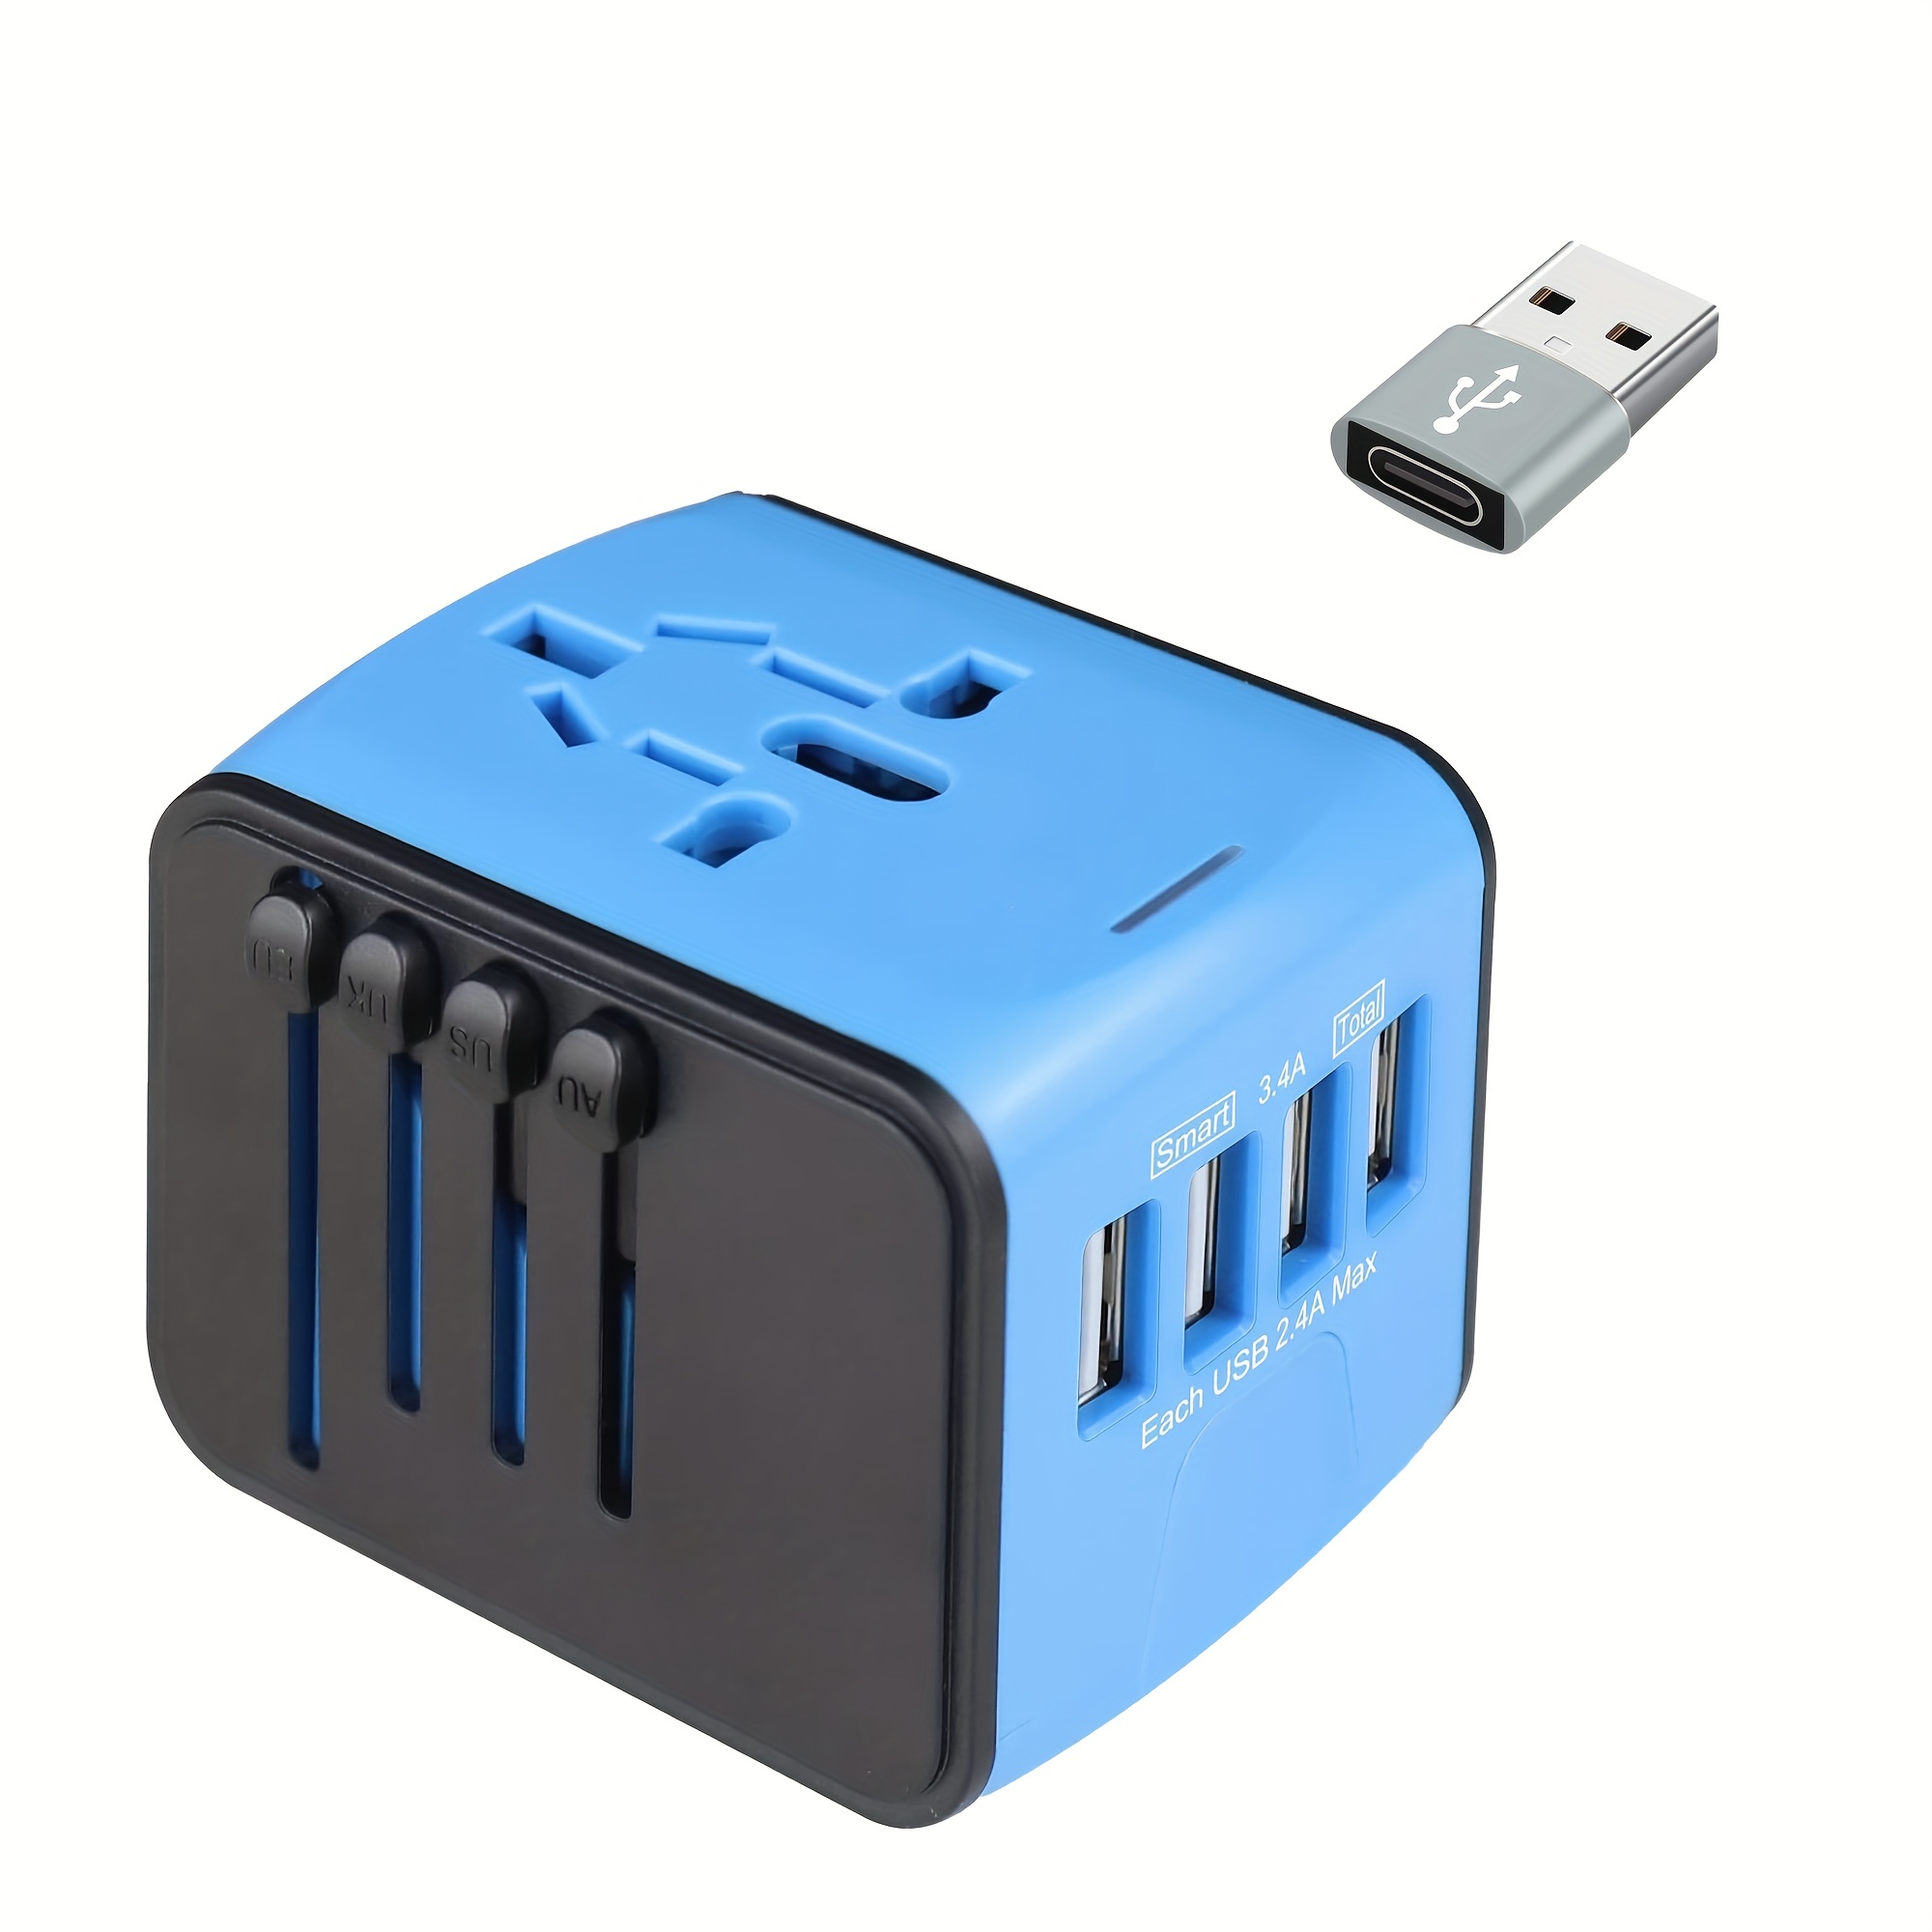 1pc International Travel Adapter Include One USBA To USBC Adapter,  Universal Power Adapter Worldwide All In One 4 USB Perfect For European US,  EU, UK